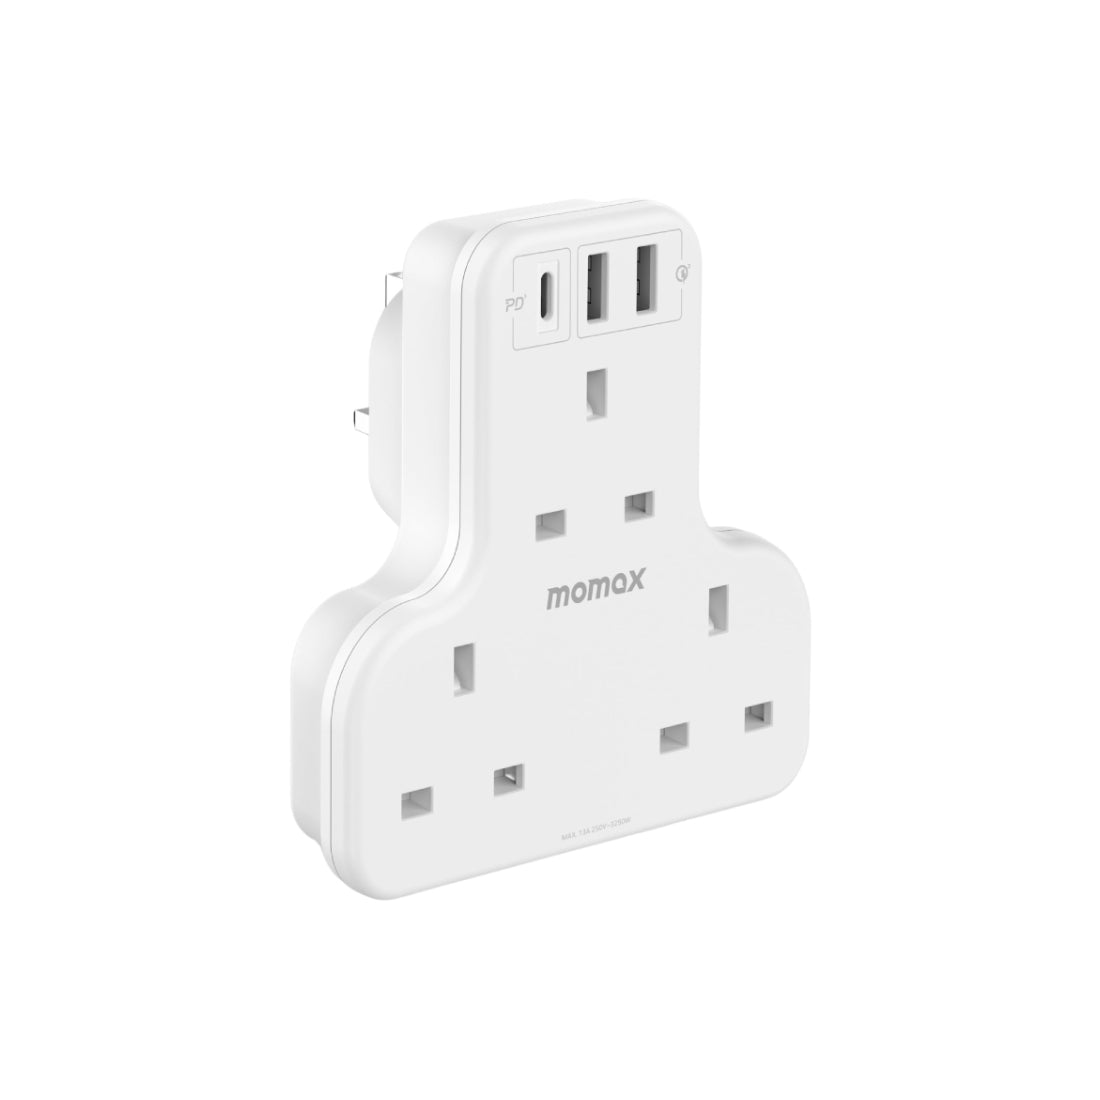 Momax OnePlug 3-Outlet T-Shaped Extension Socket With USB - White - محول - Store 974 | ستور ٩٧٤